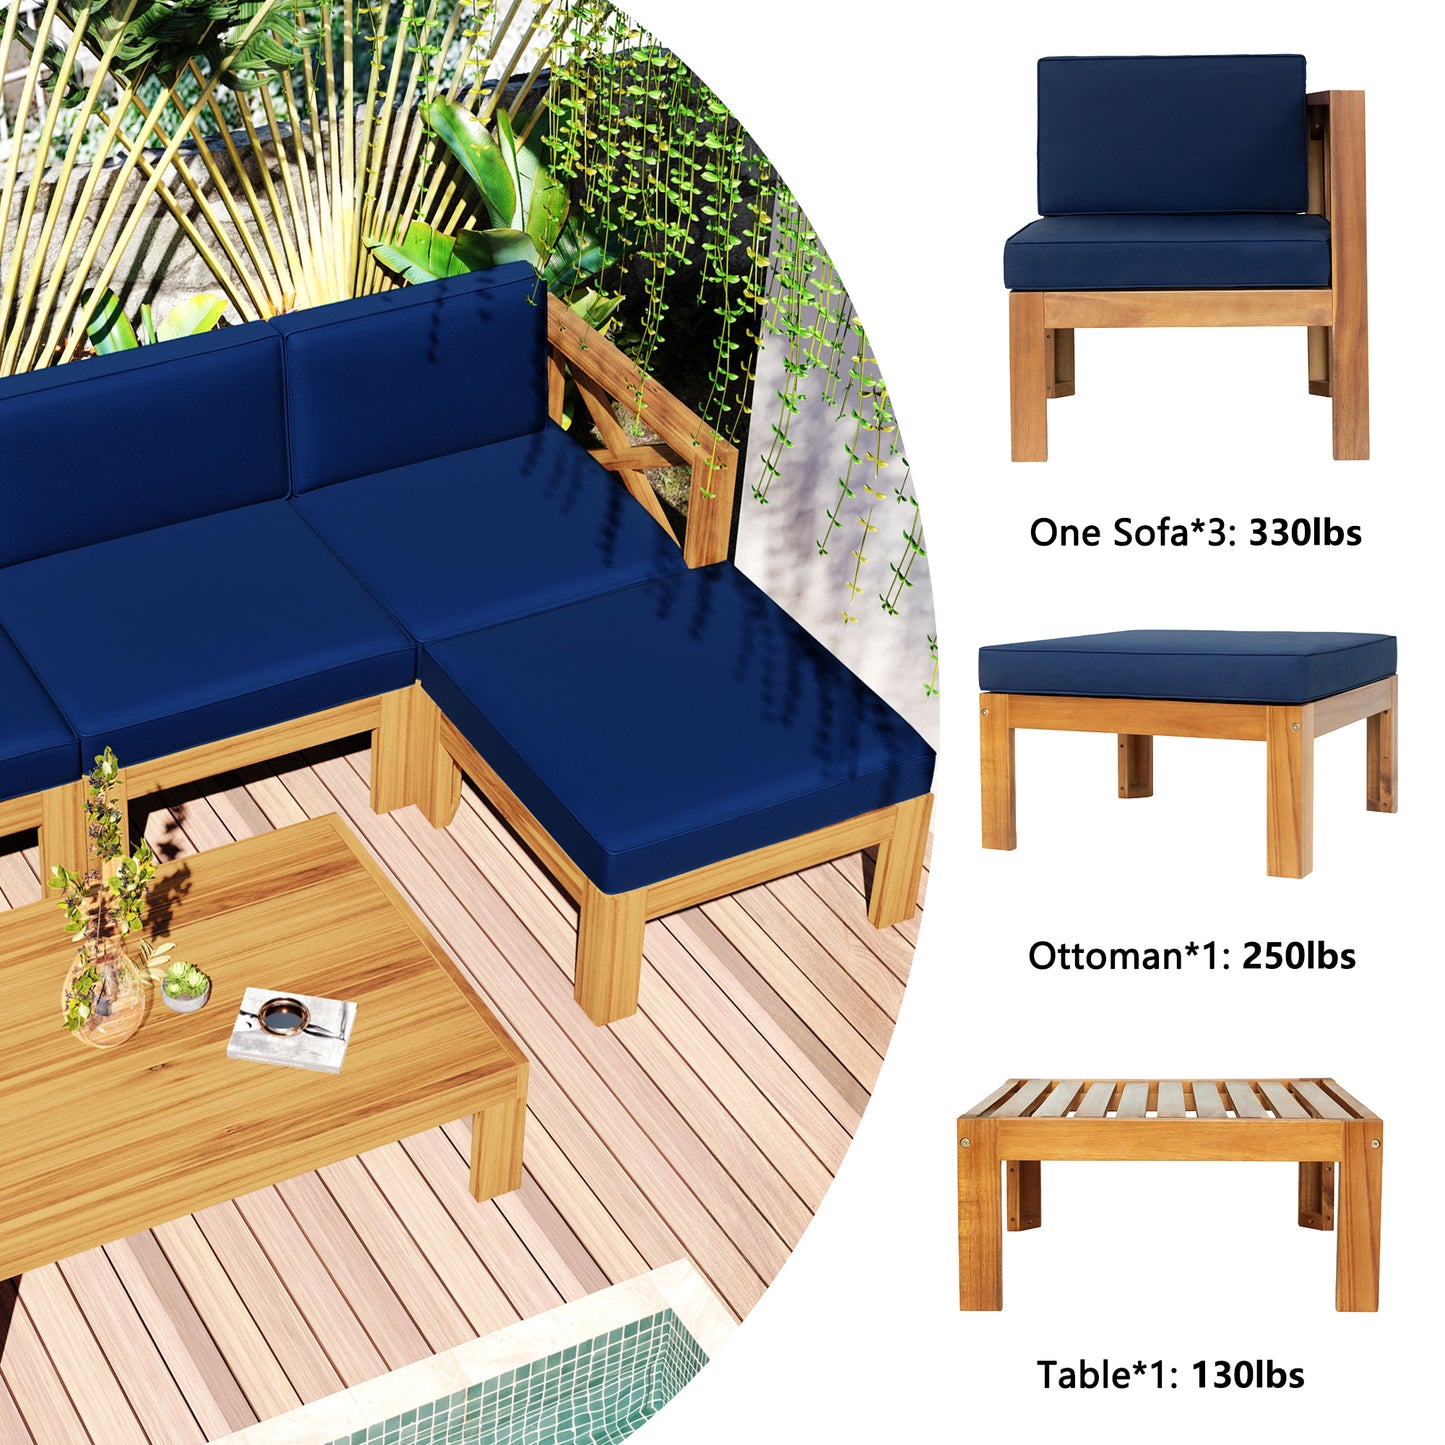 5-Piece Wood Outdoor Sectional Sofa Patio Set with Blue Cushions